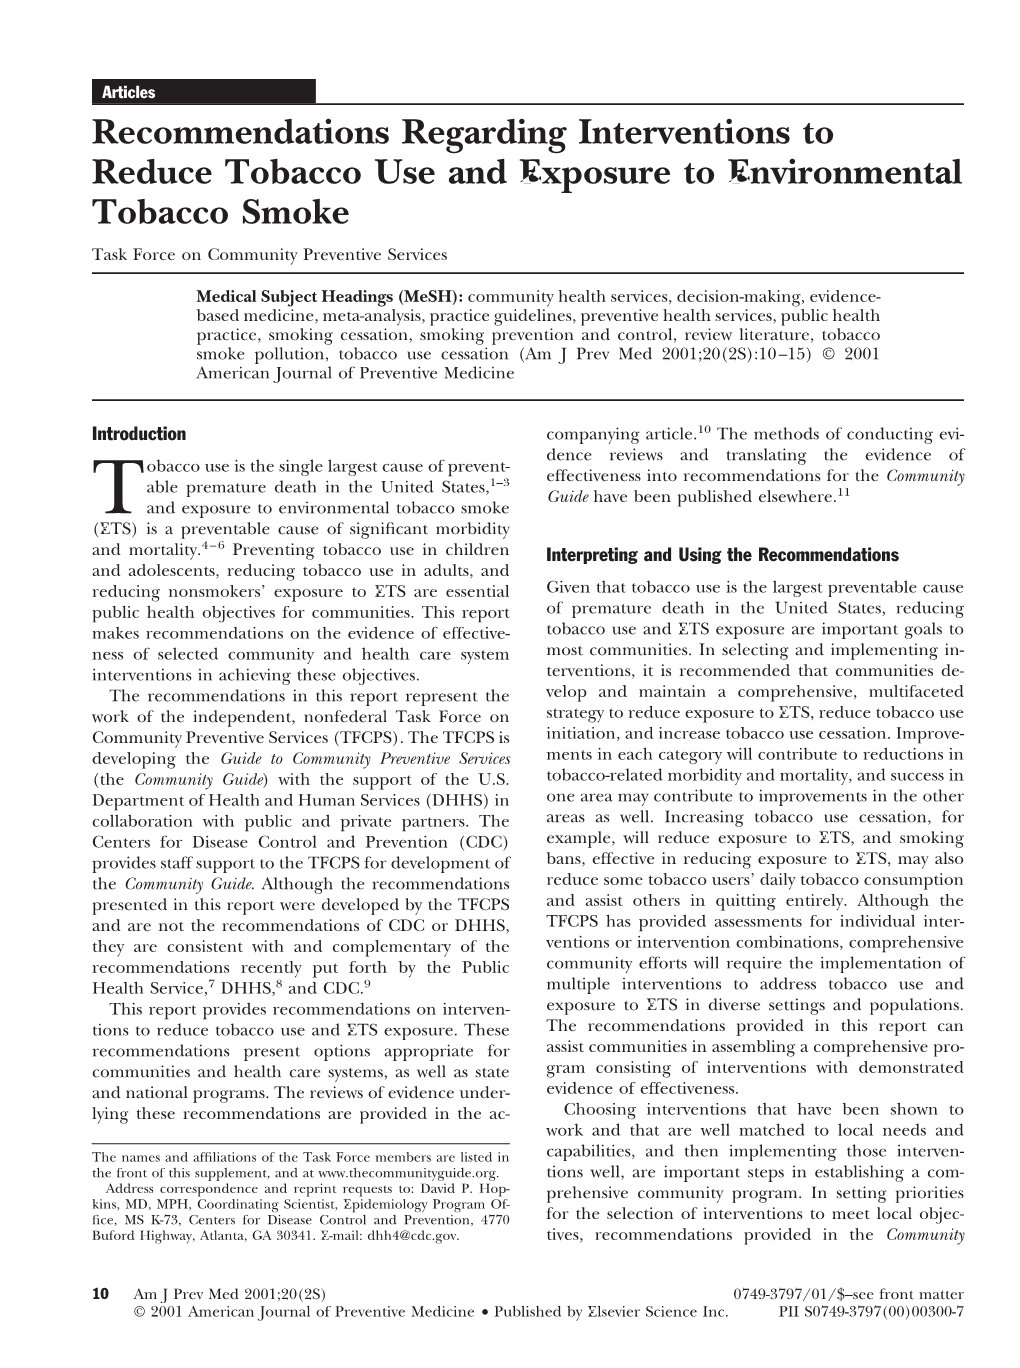 Exposure to Environmental Tobacco Smoke Task Force on Community Preventive Services